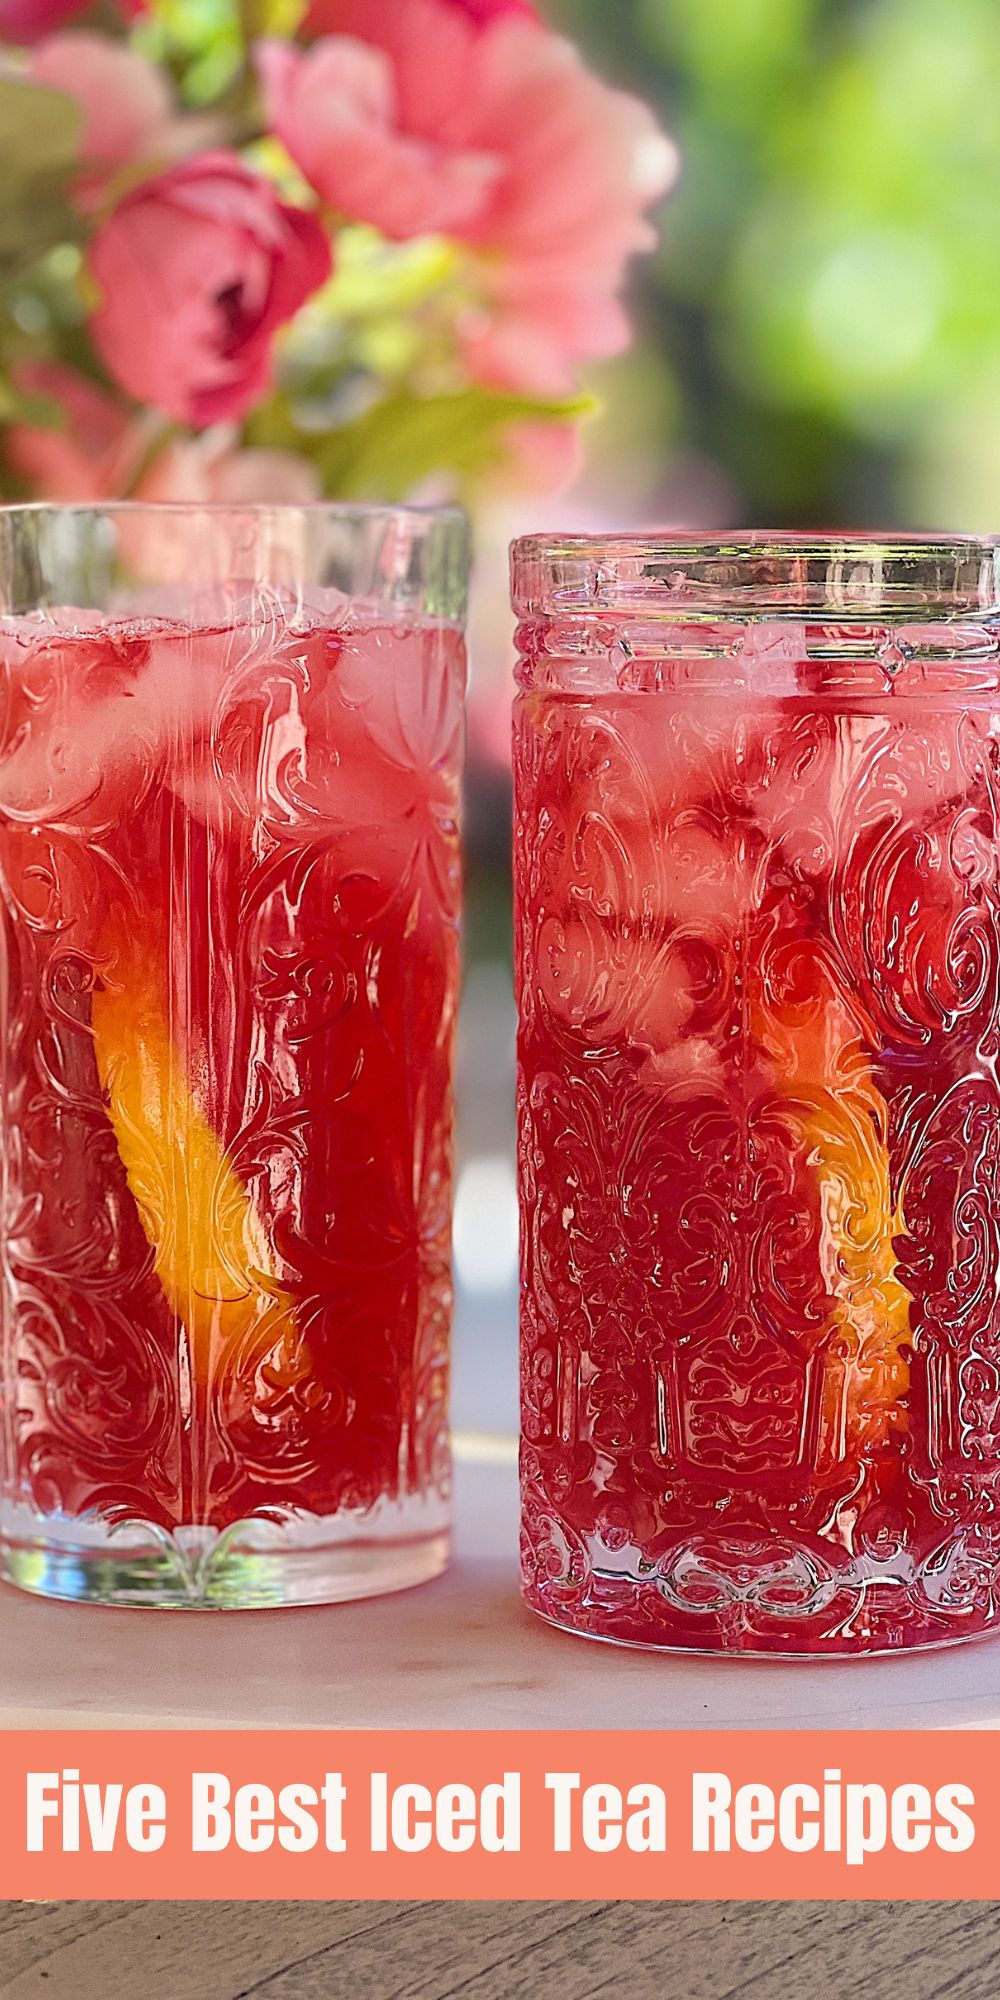 This summer has been hot and I always find a cool glass of iced tea is a perfect way to refresh. Here are my five best iced tea recipes.